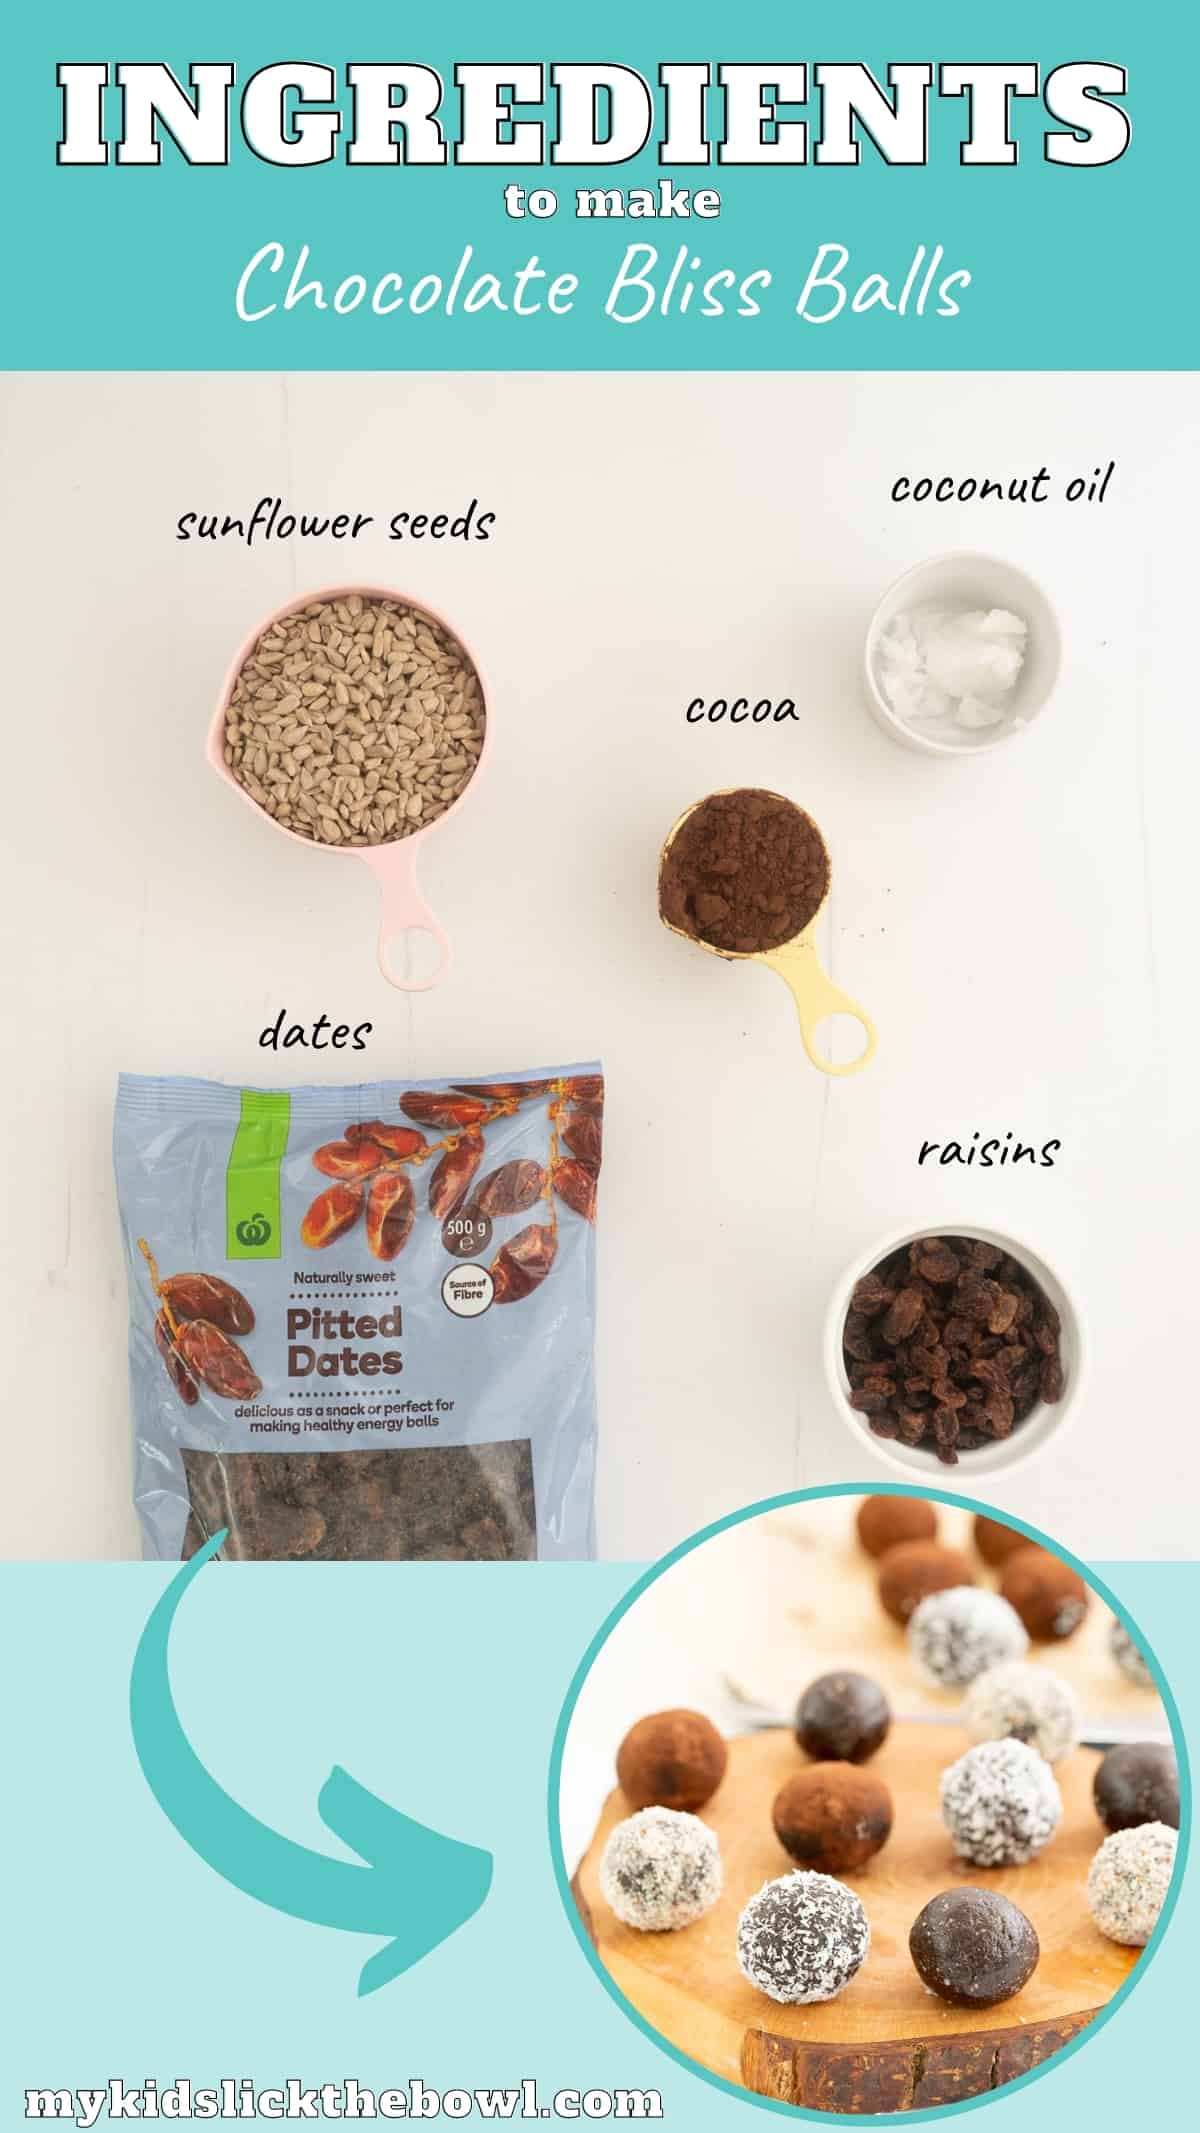 The ingredients to make chocolate bliss balls laid out on a bench top with text overlay.